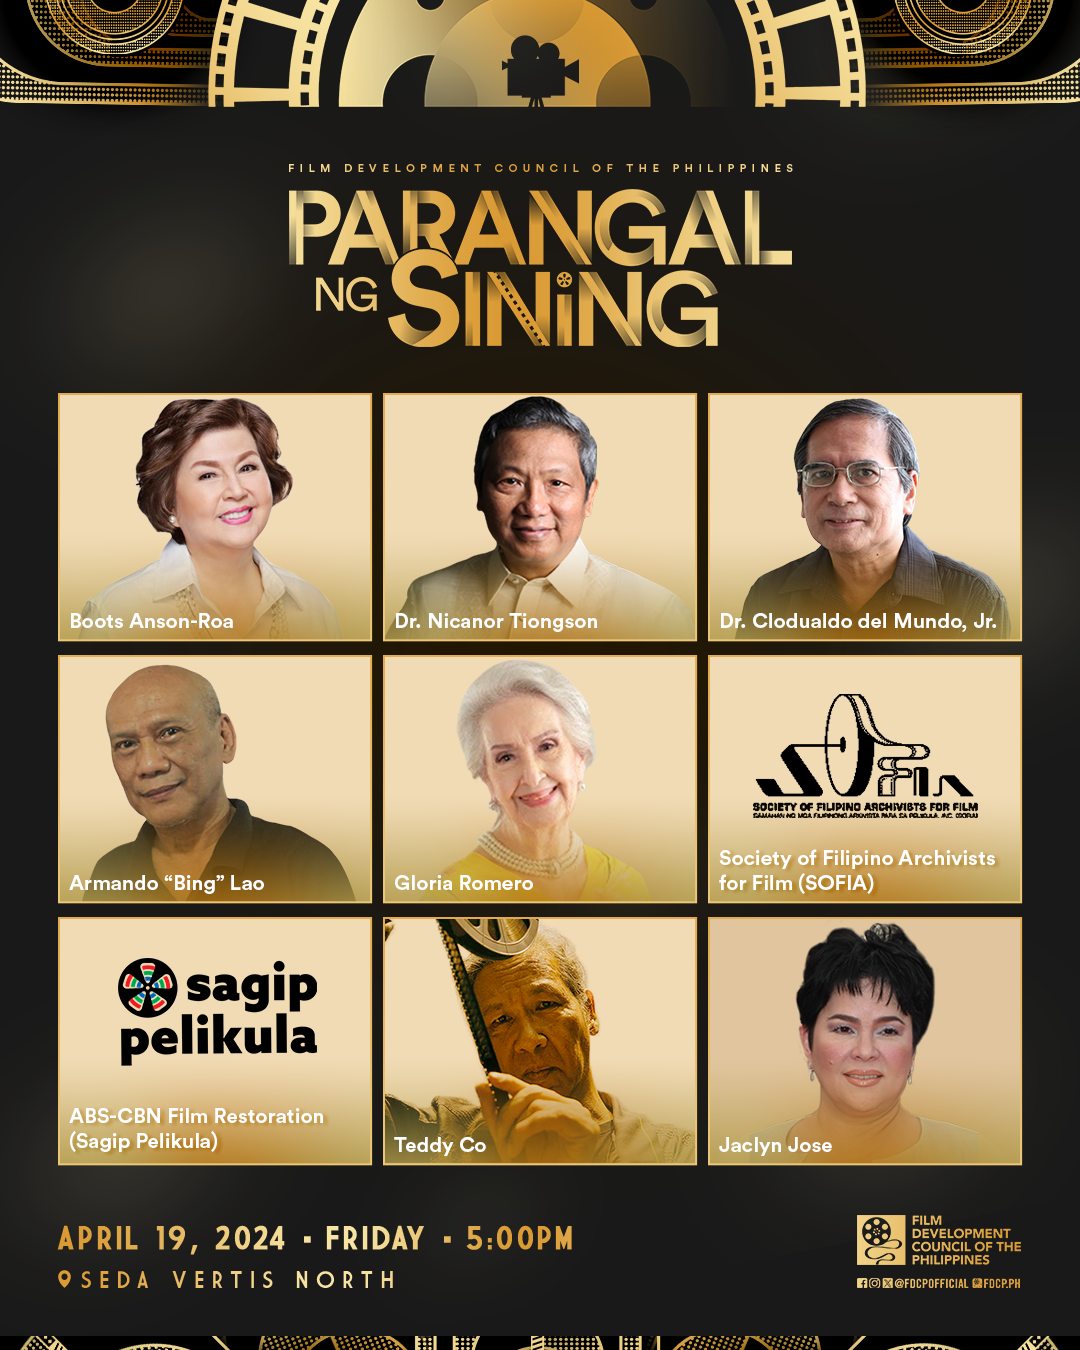 FDCP to honor Jaclyn Jose, Gloria Romero, Boots Anson-Roa in Parangal ng Sining | Image: Facebook/Film Development Council of the Philippines